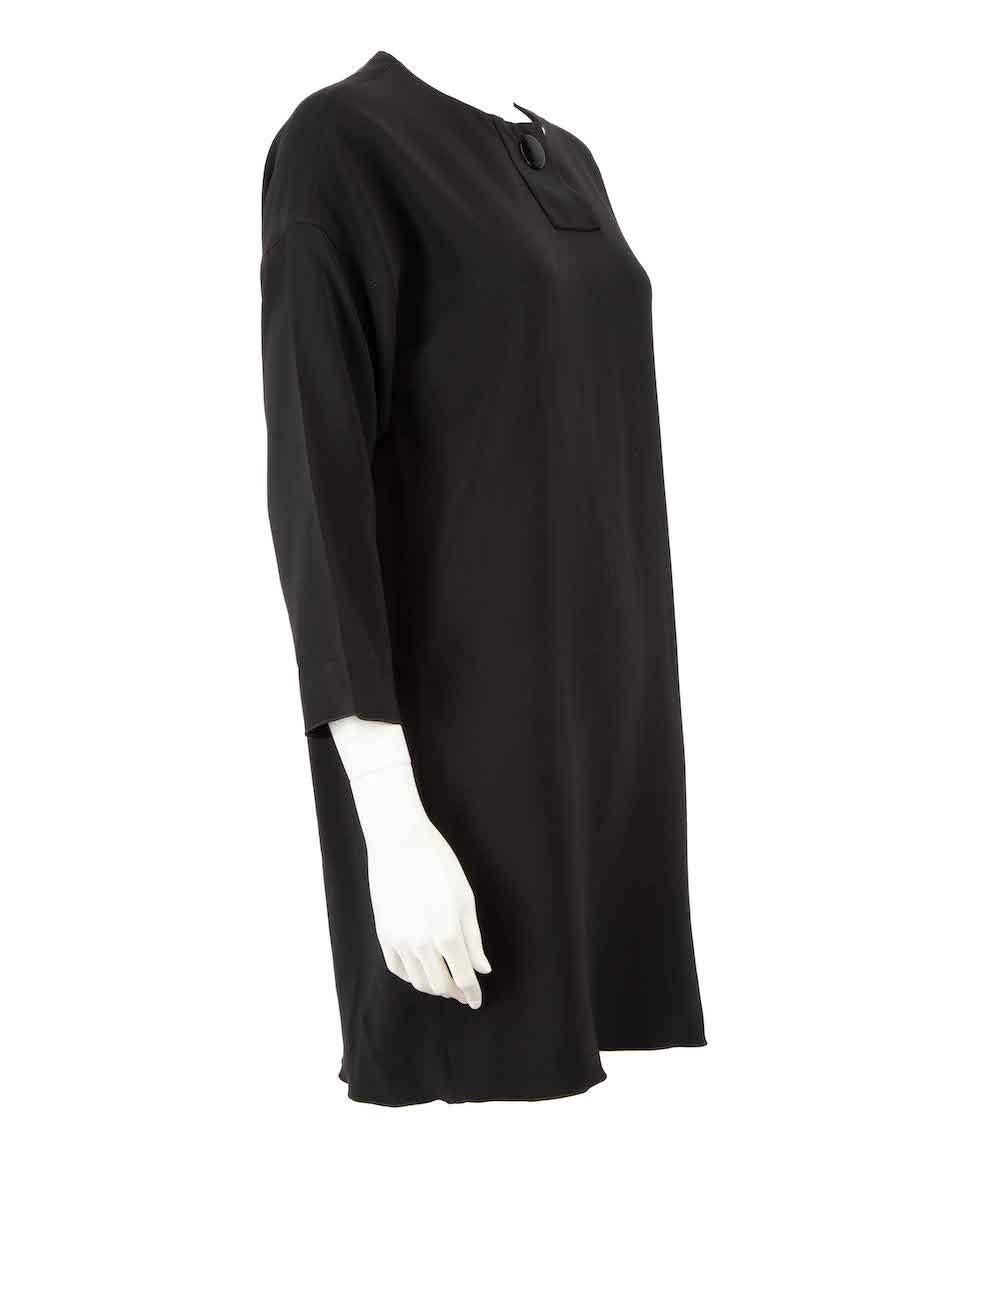 CONDITION is Very good. Minimal wear to dress is evident. Minimal wear to the button fastening with light scratches to the button and two small plucks to the weave at the front on this used Céline designer resale item.
 
 
 
 Details
 
 
 Black
 
